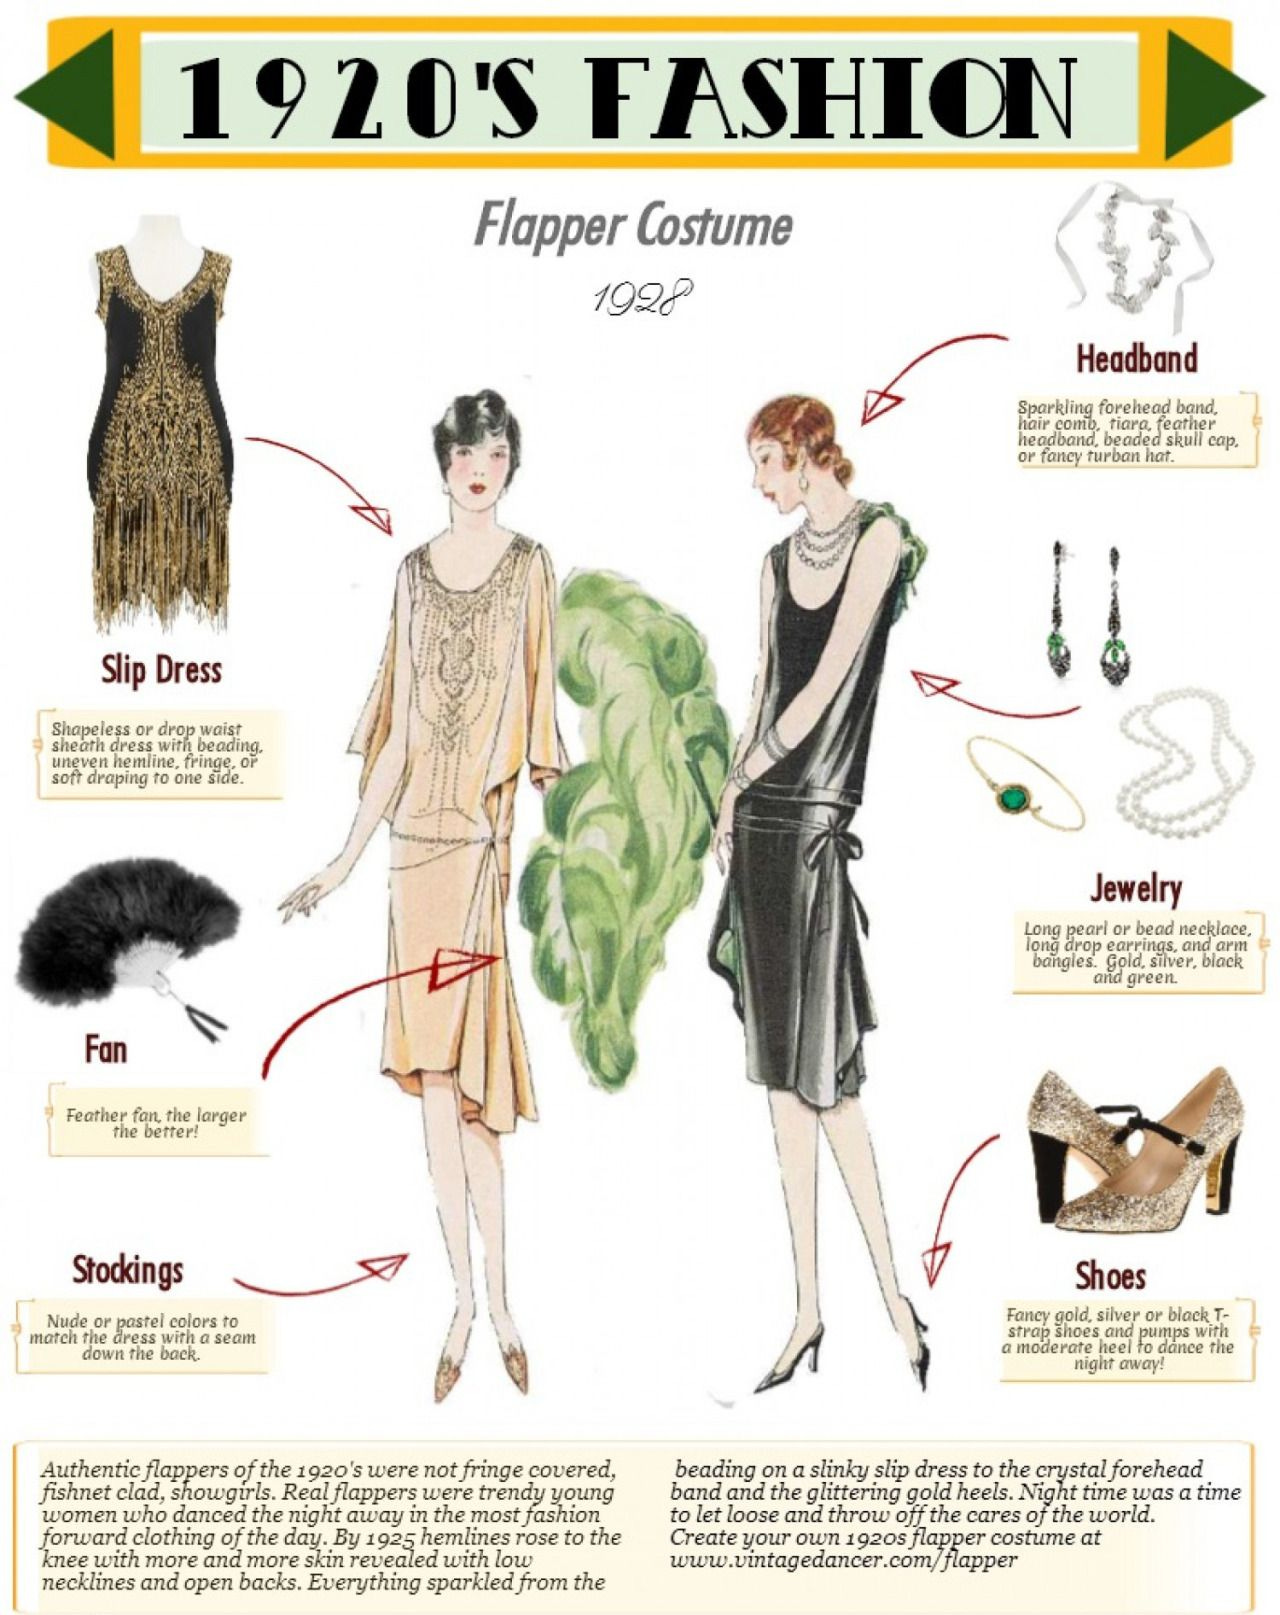 The Flappers in the 1920s added a new twist to every aspect of fashion ...